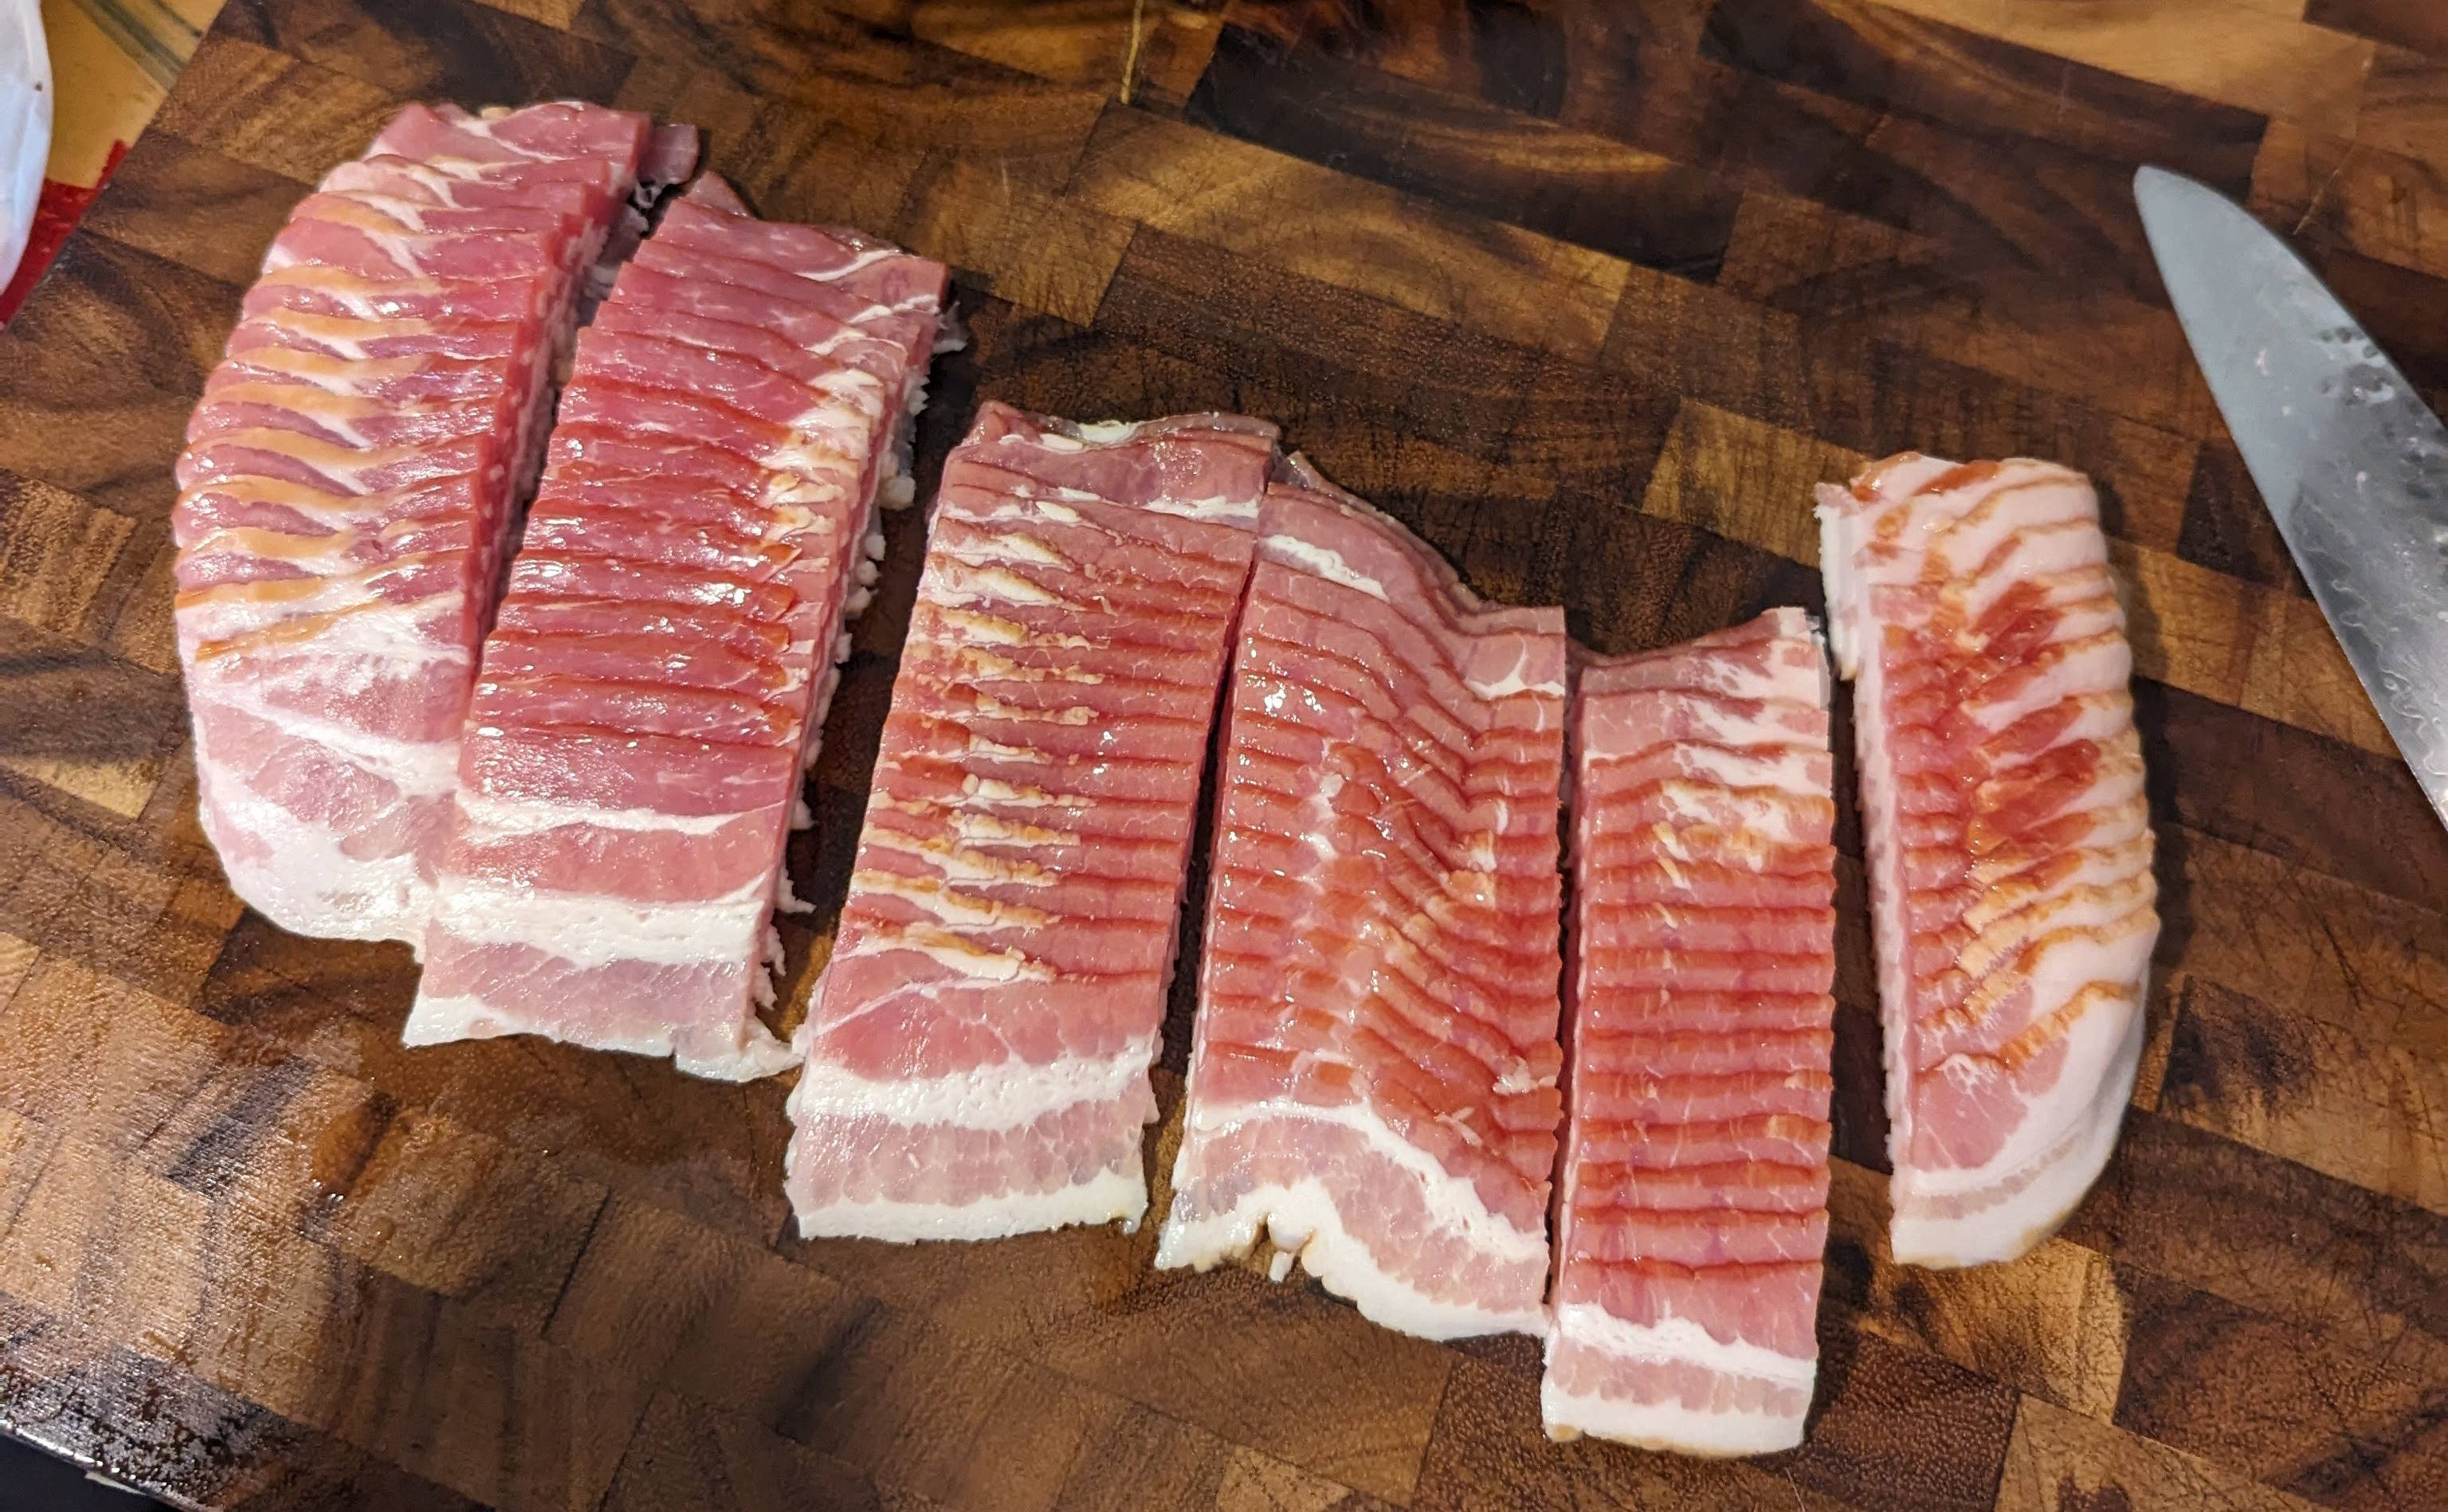 Cutting board with a one pound packet of bacon sliced into pieces.